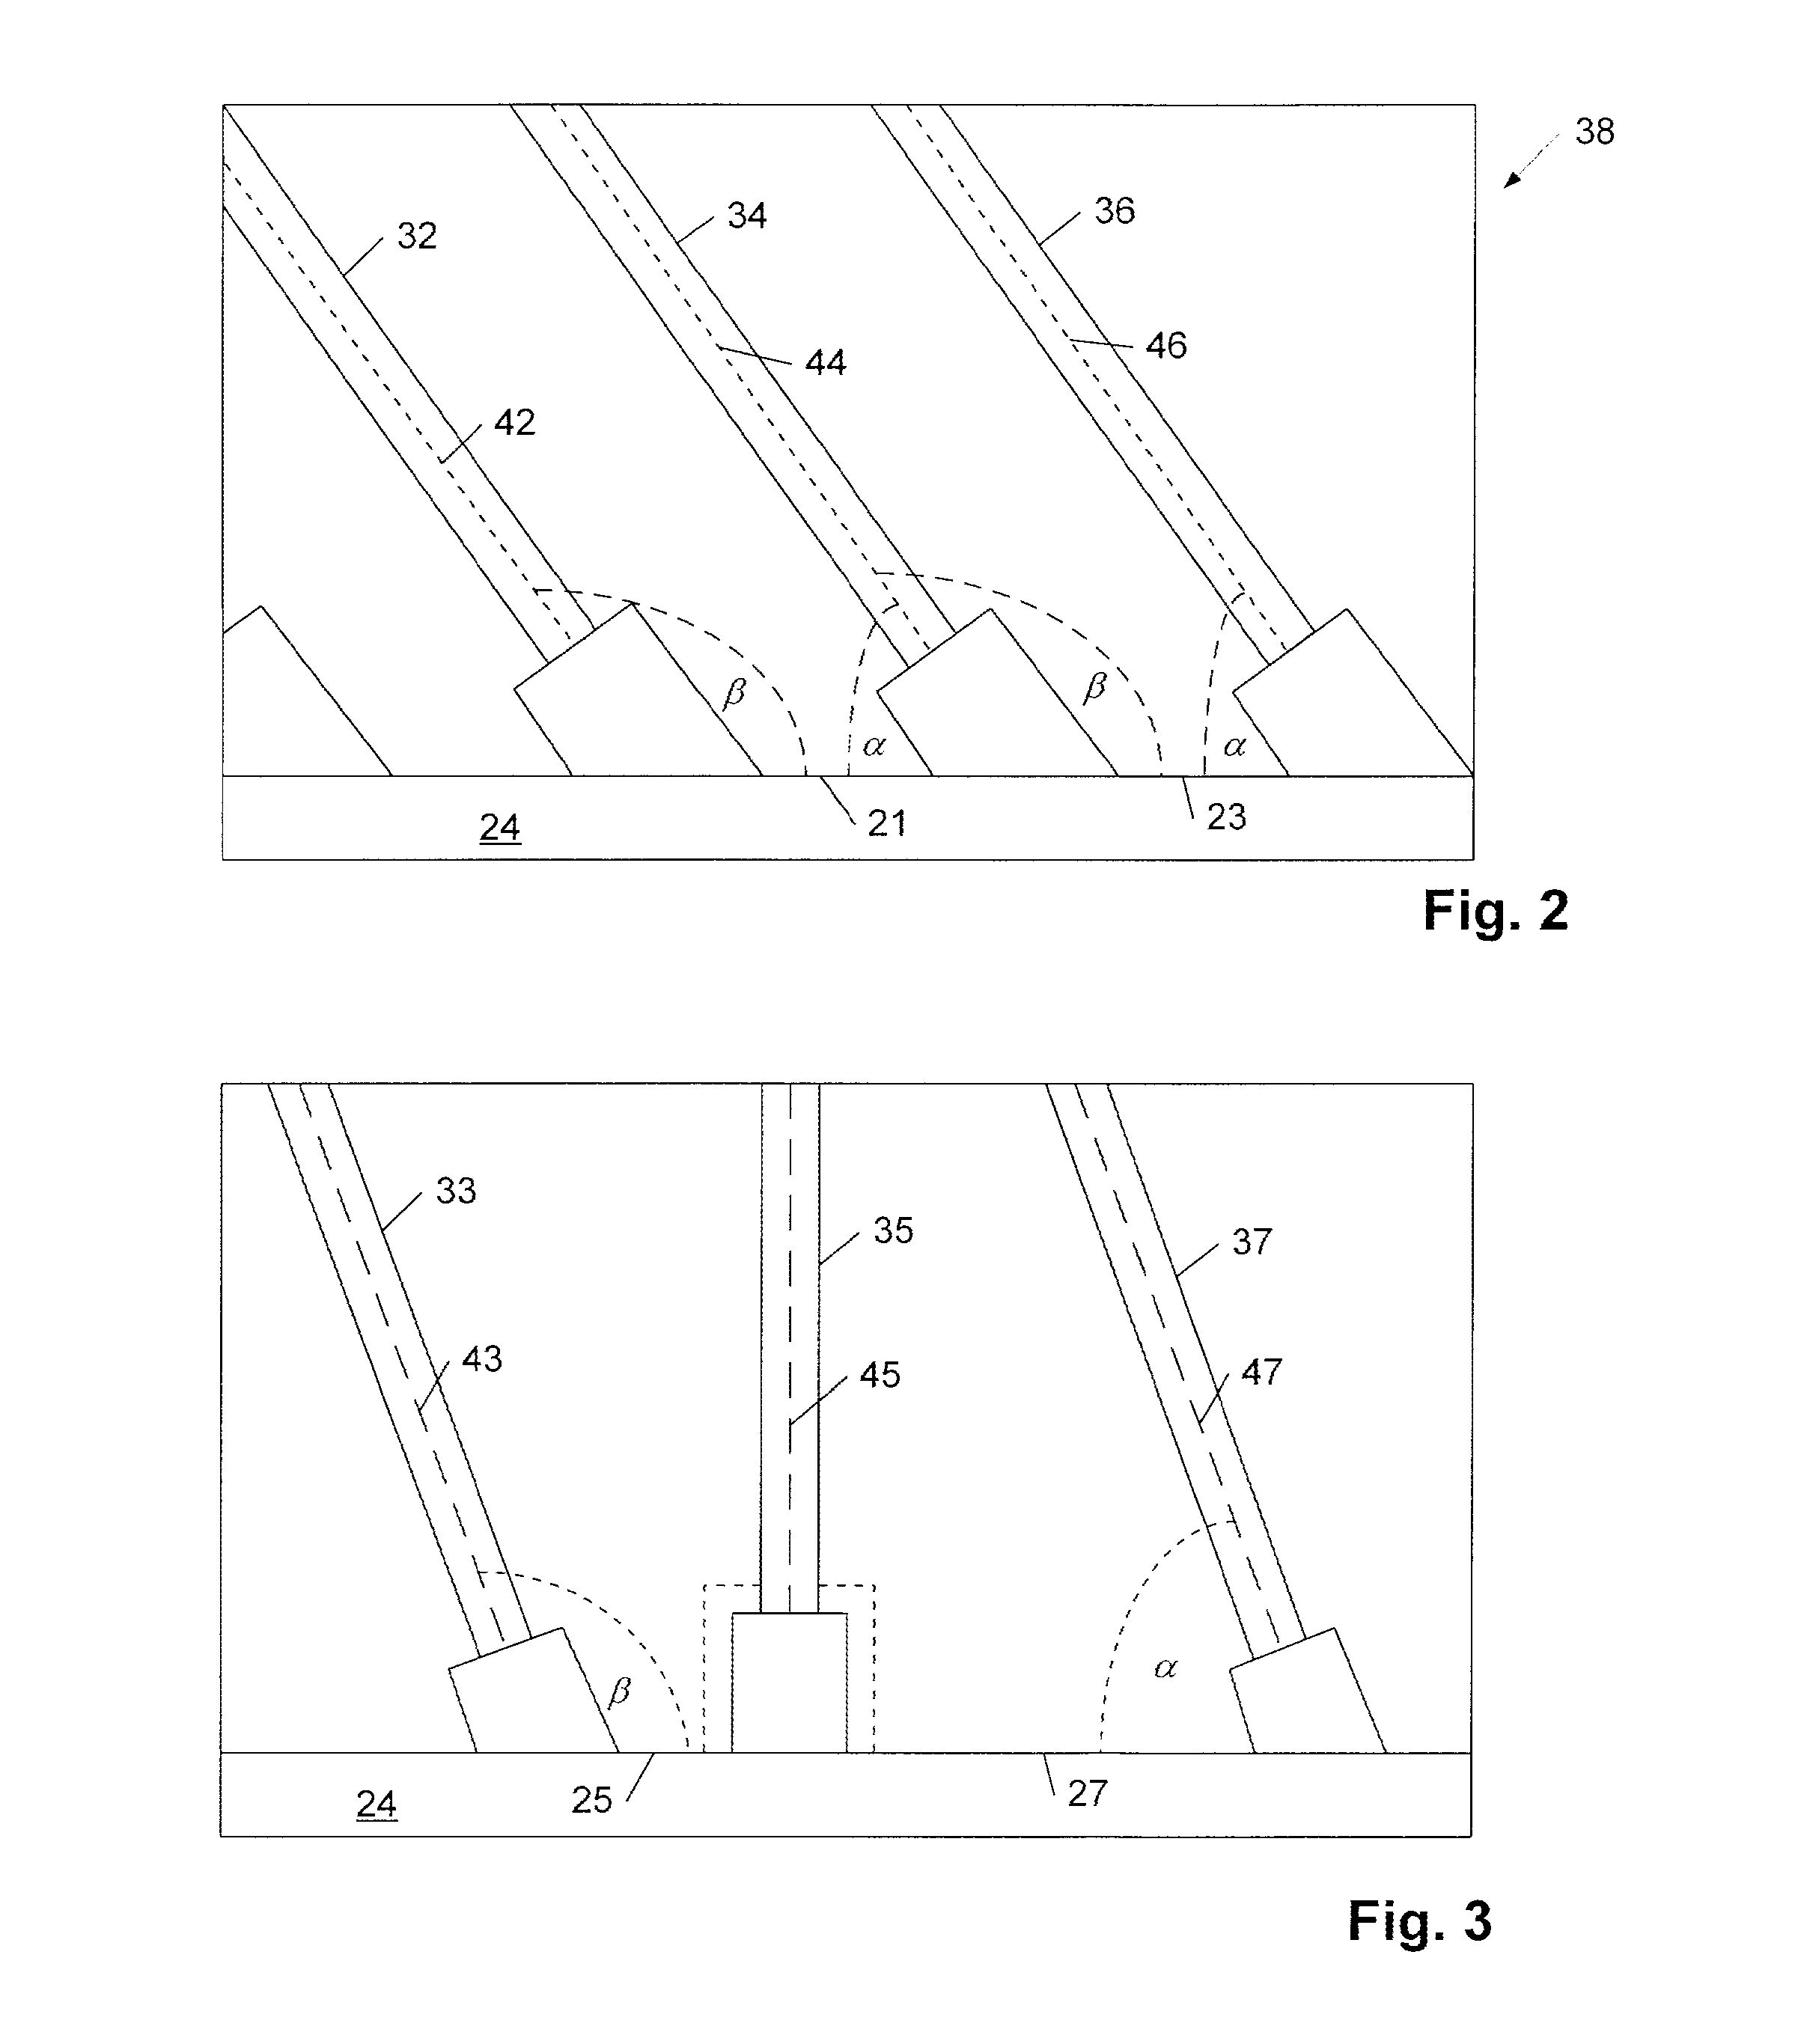 Lamp and Reflector Arrangements for Apparatuses with Multiple Germicidal Lamps